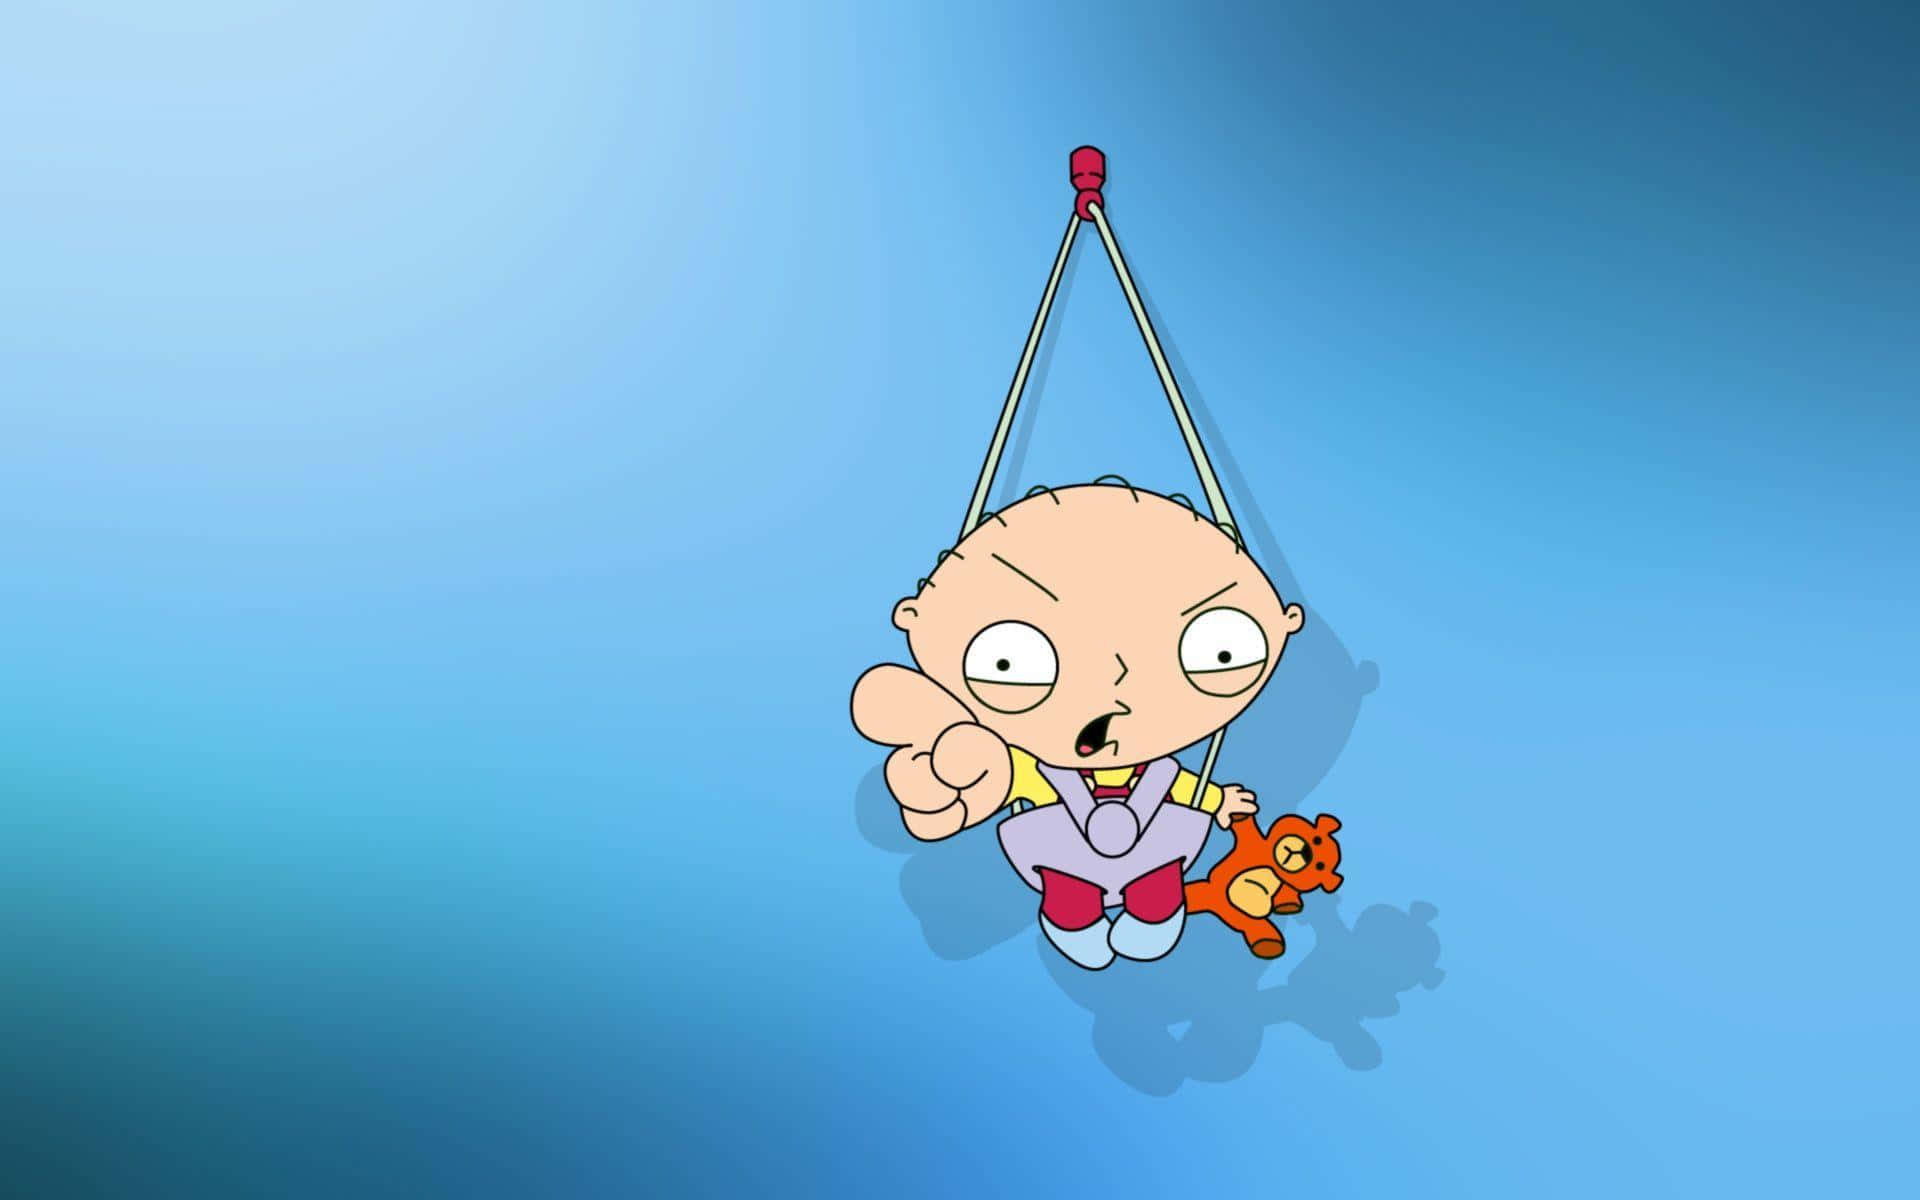 A Cartoon Character Hanging From A String Wallpaper